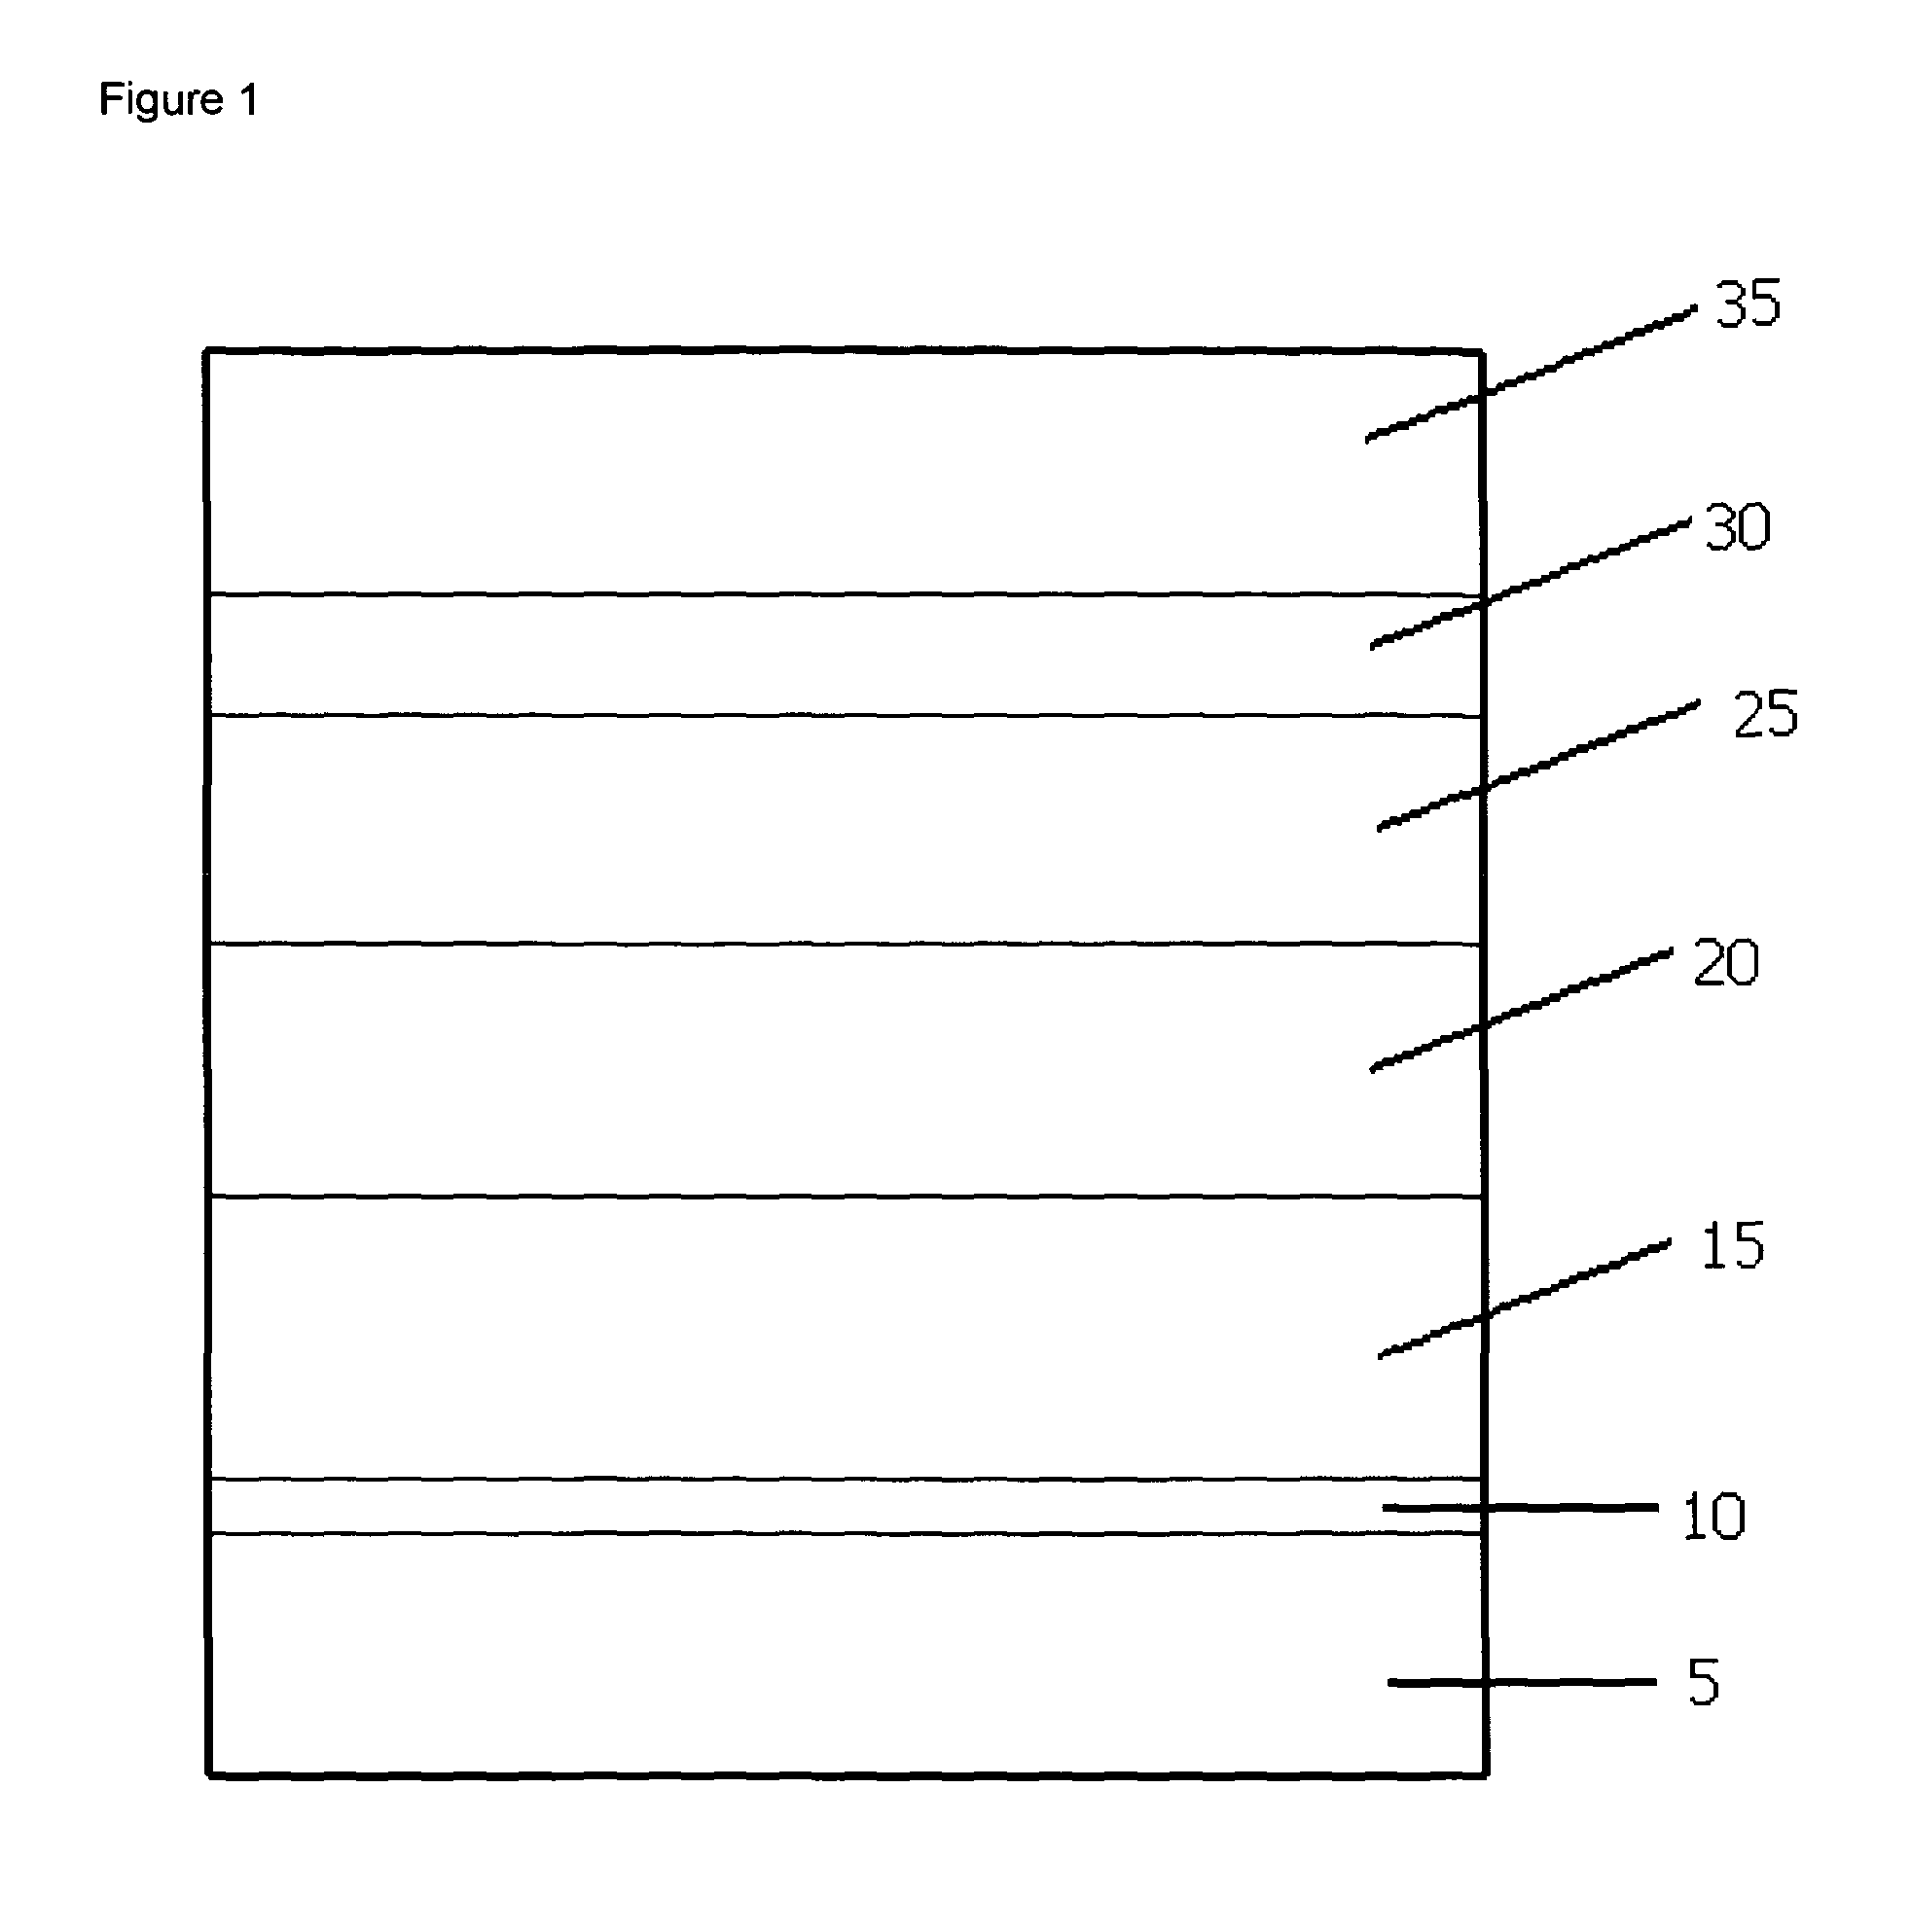 Semiconductor wafer comprising gallium nitride layer having one or more silicon nitride interlayer therein